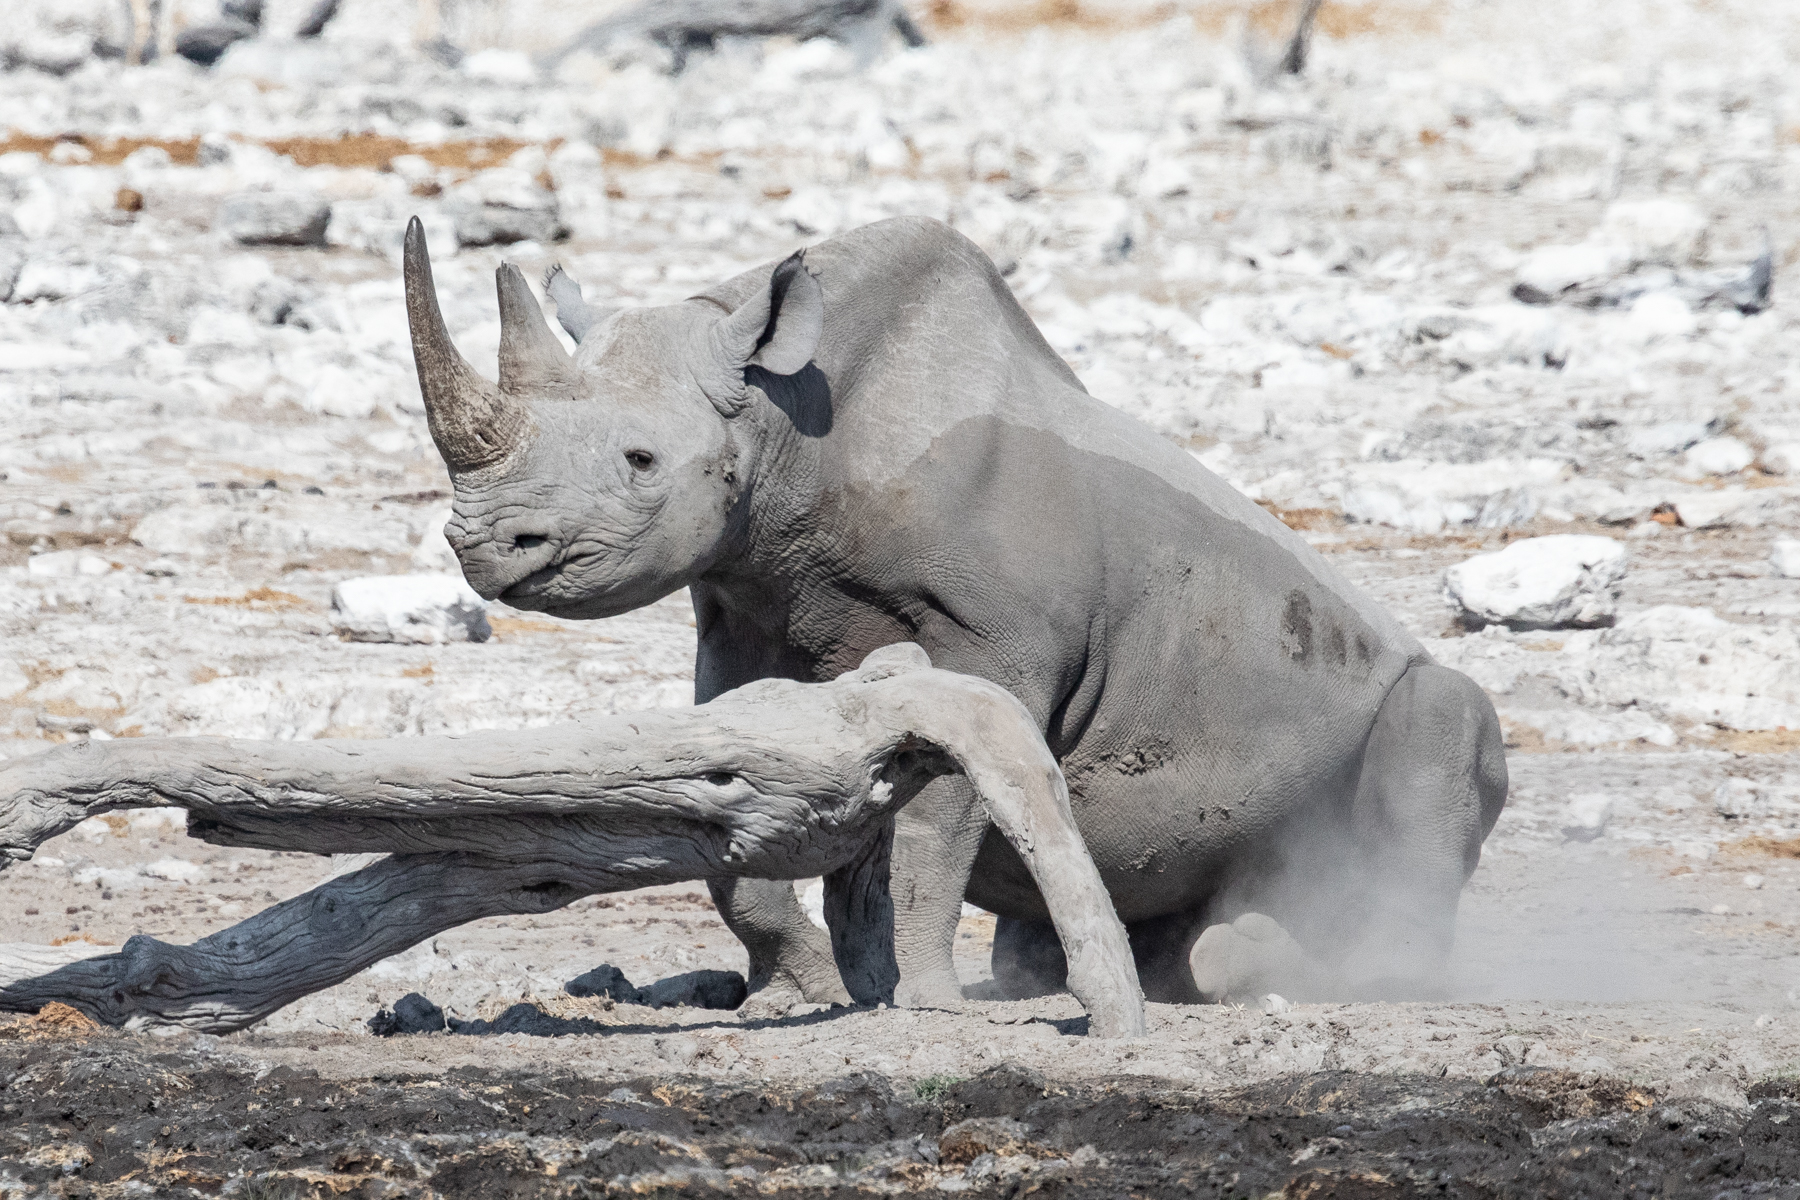 A Black Rhino decides to lie down behind a piece of wood after his drink